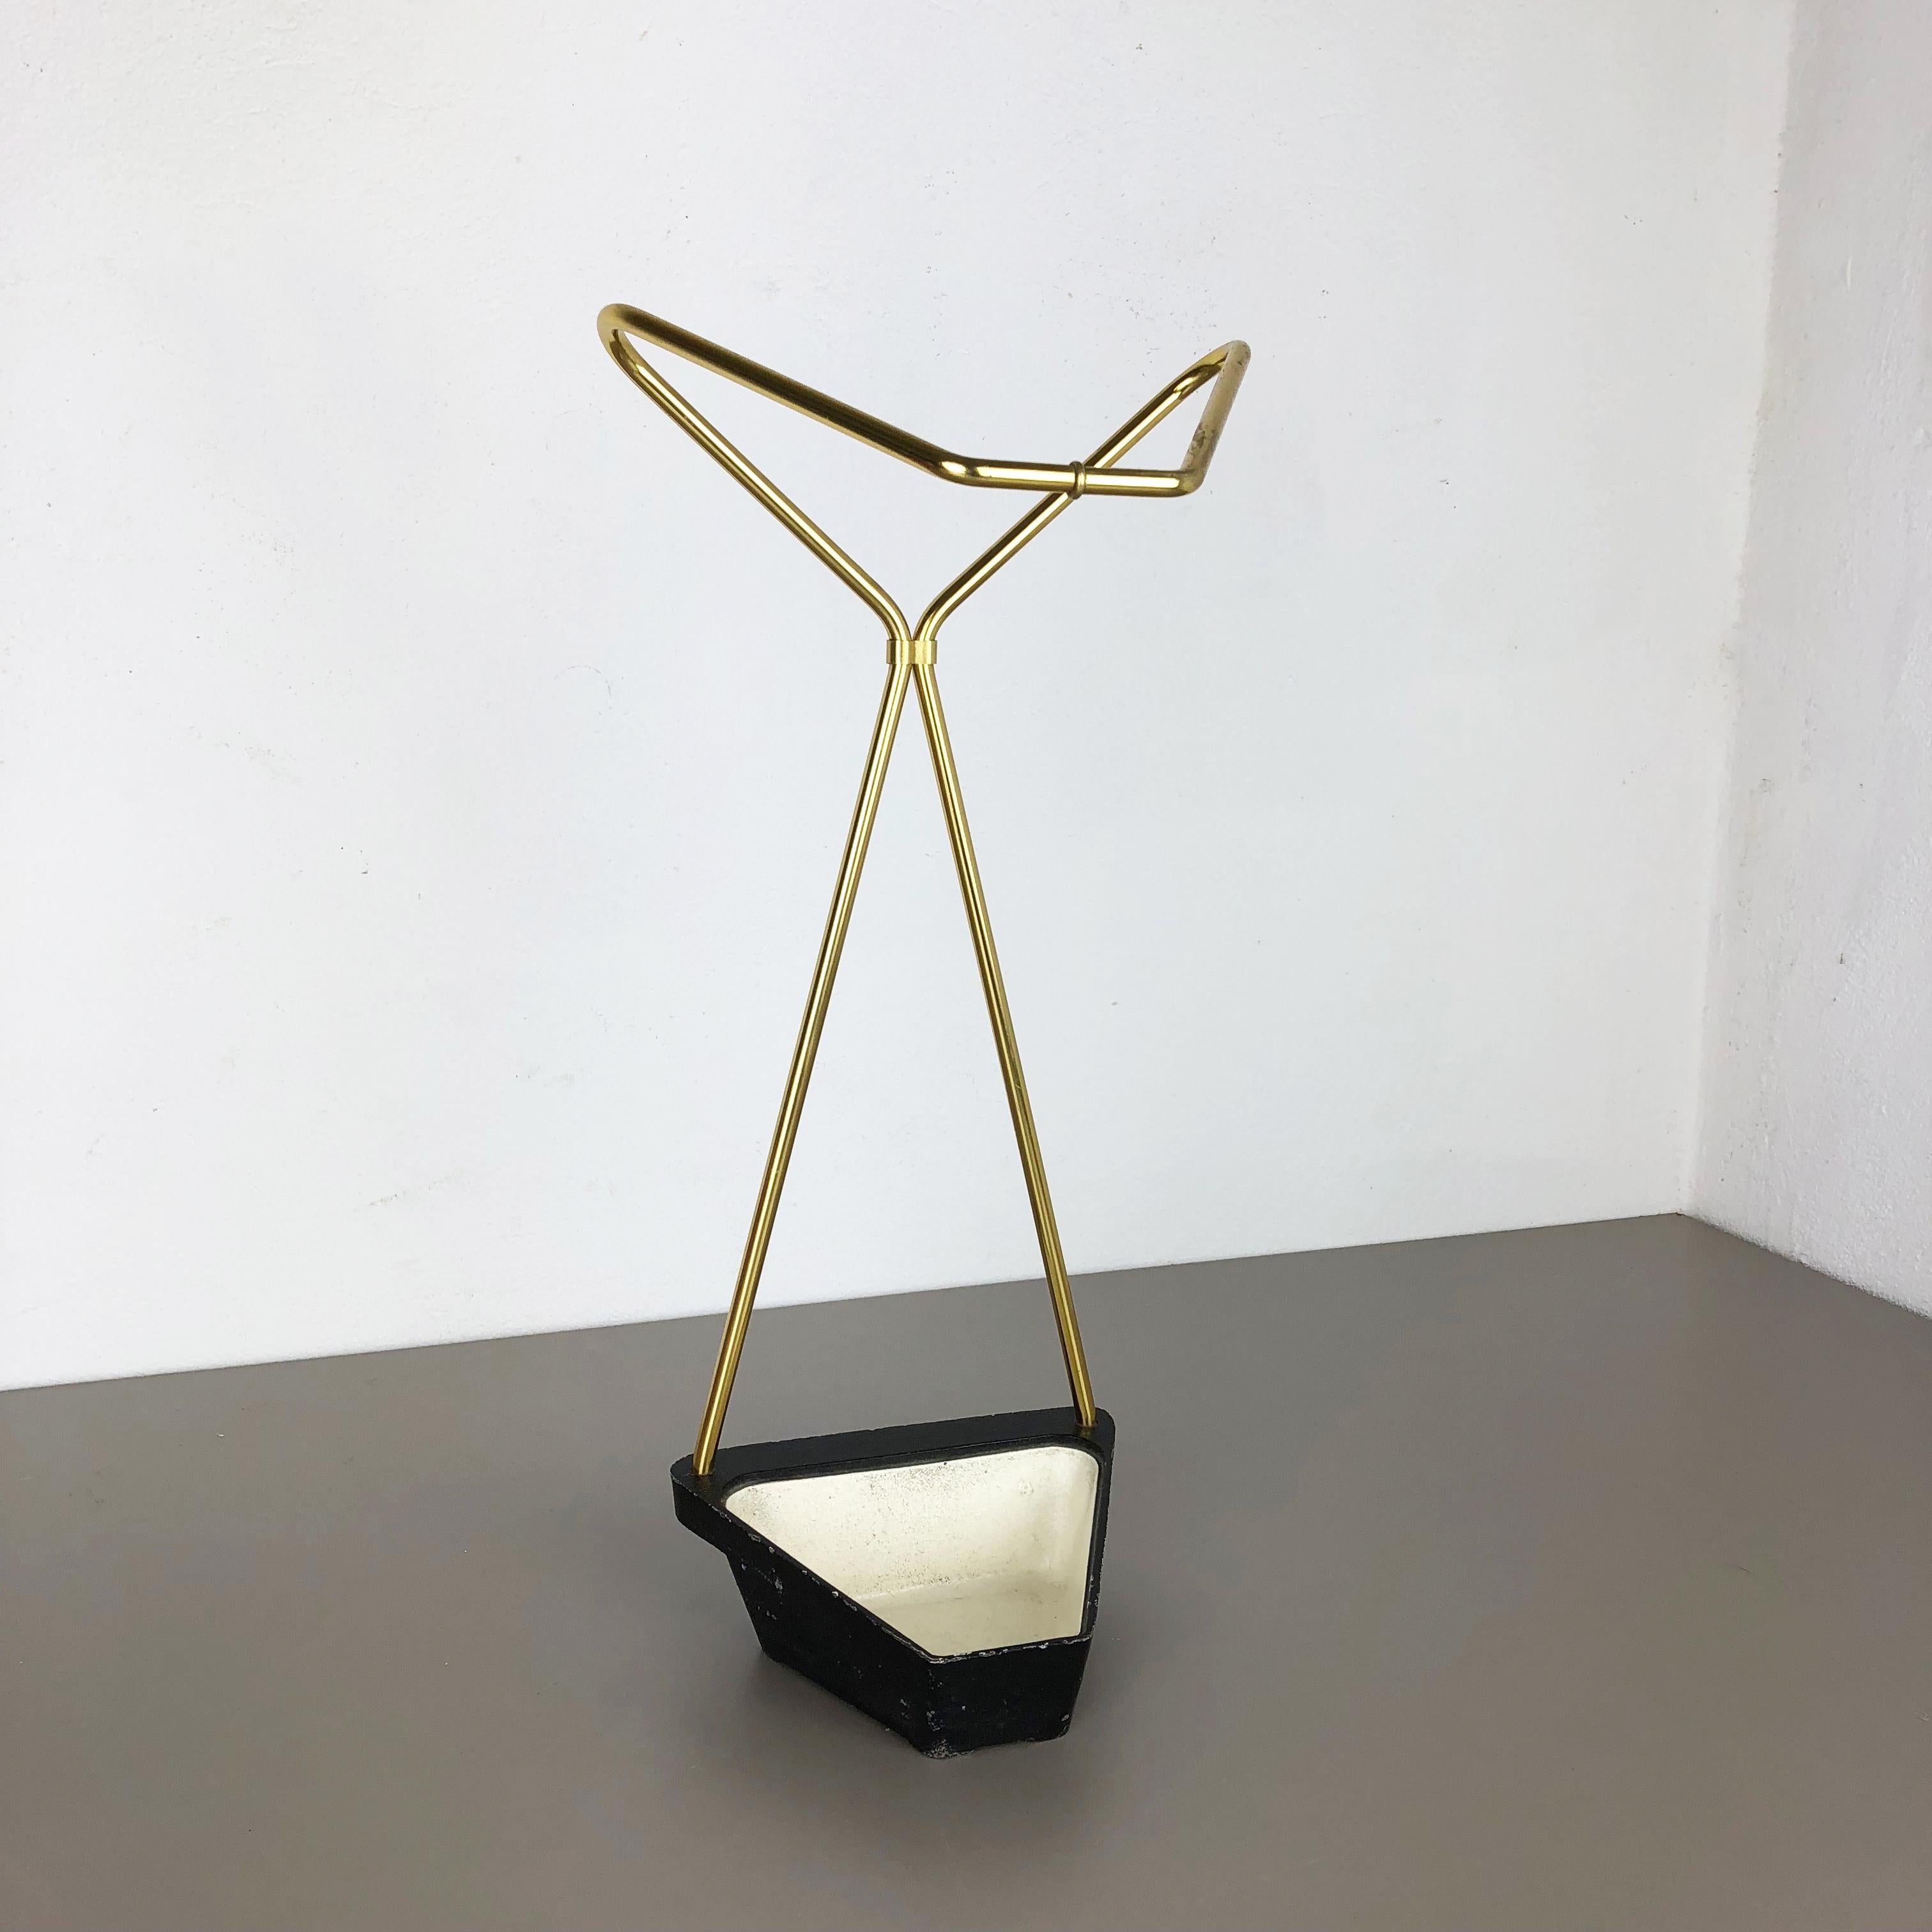 Article:

Bauhaus umbrella stand


Origin:

Germany


Age:

1950s


This original vintage Bauhaus style umbrella stand was produced in the 1950s in Germany. The brass colored top elements is made of aluminium, the heavy metal base element is made of